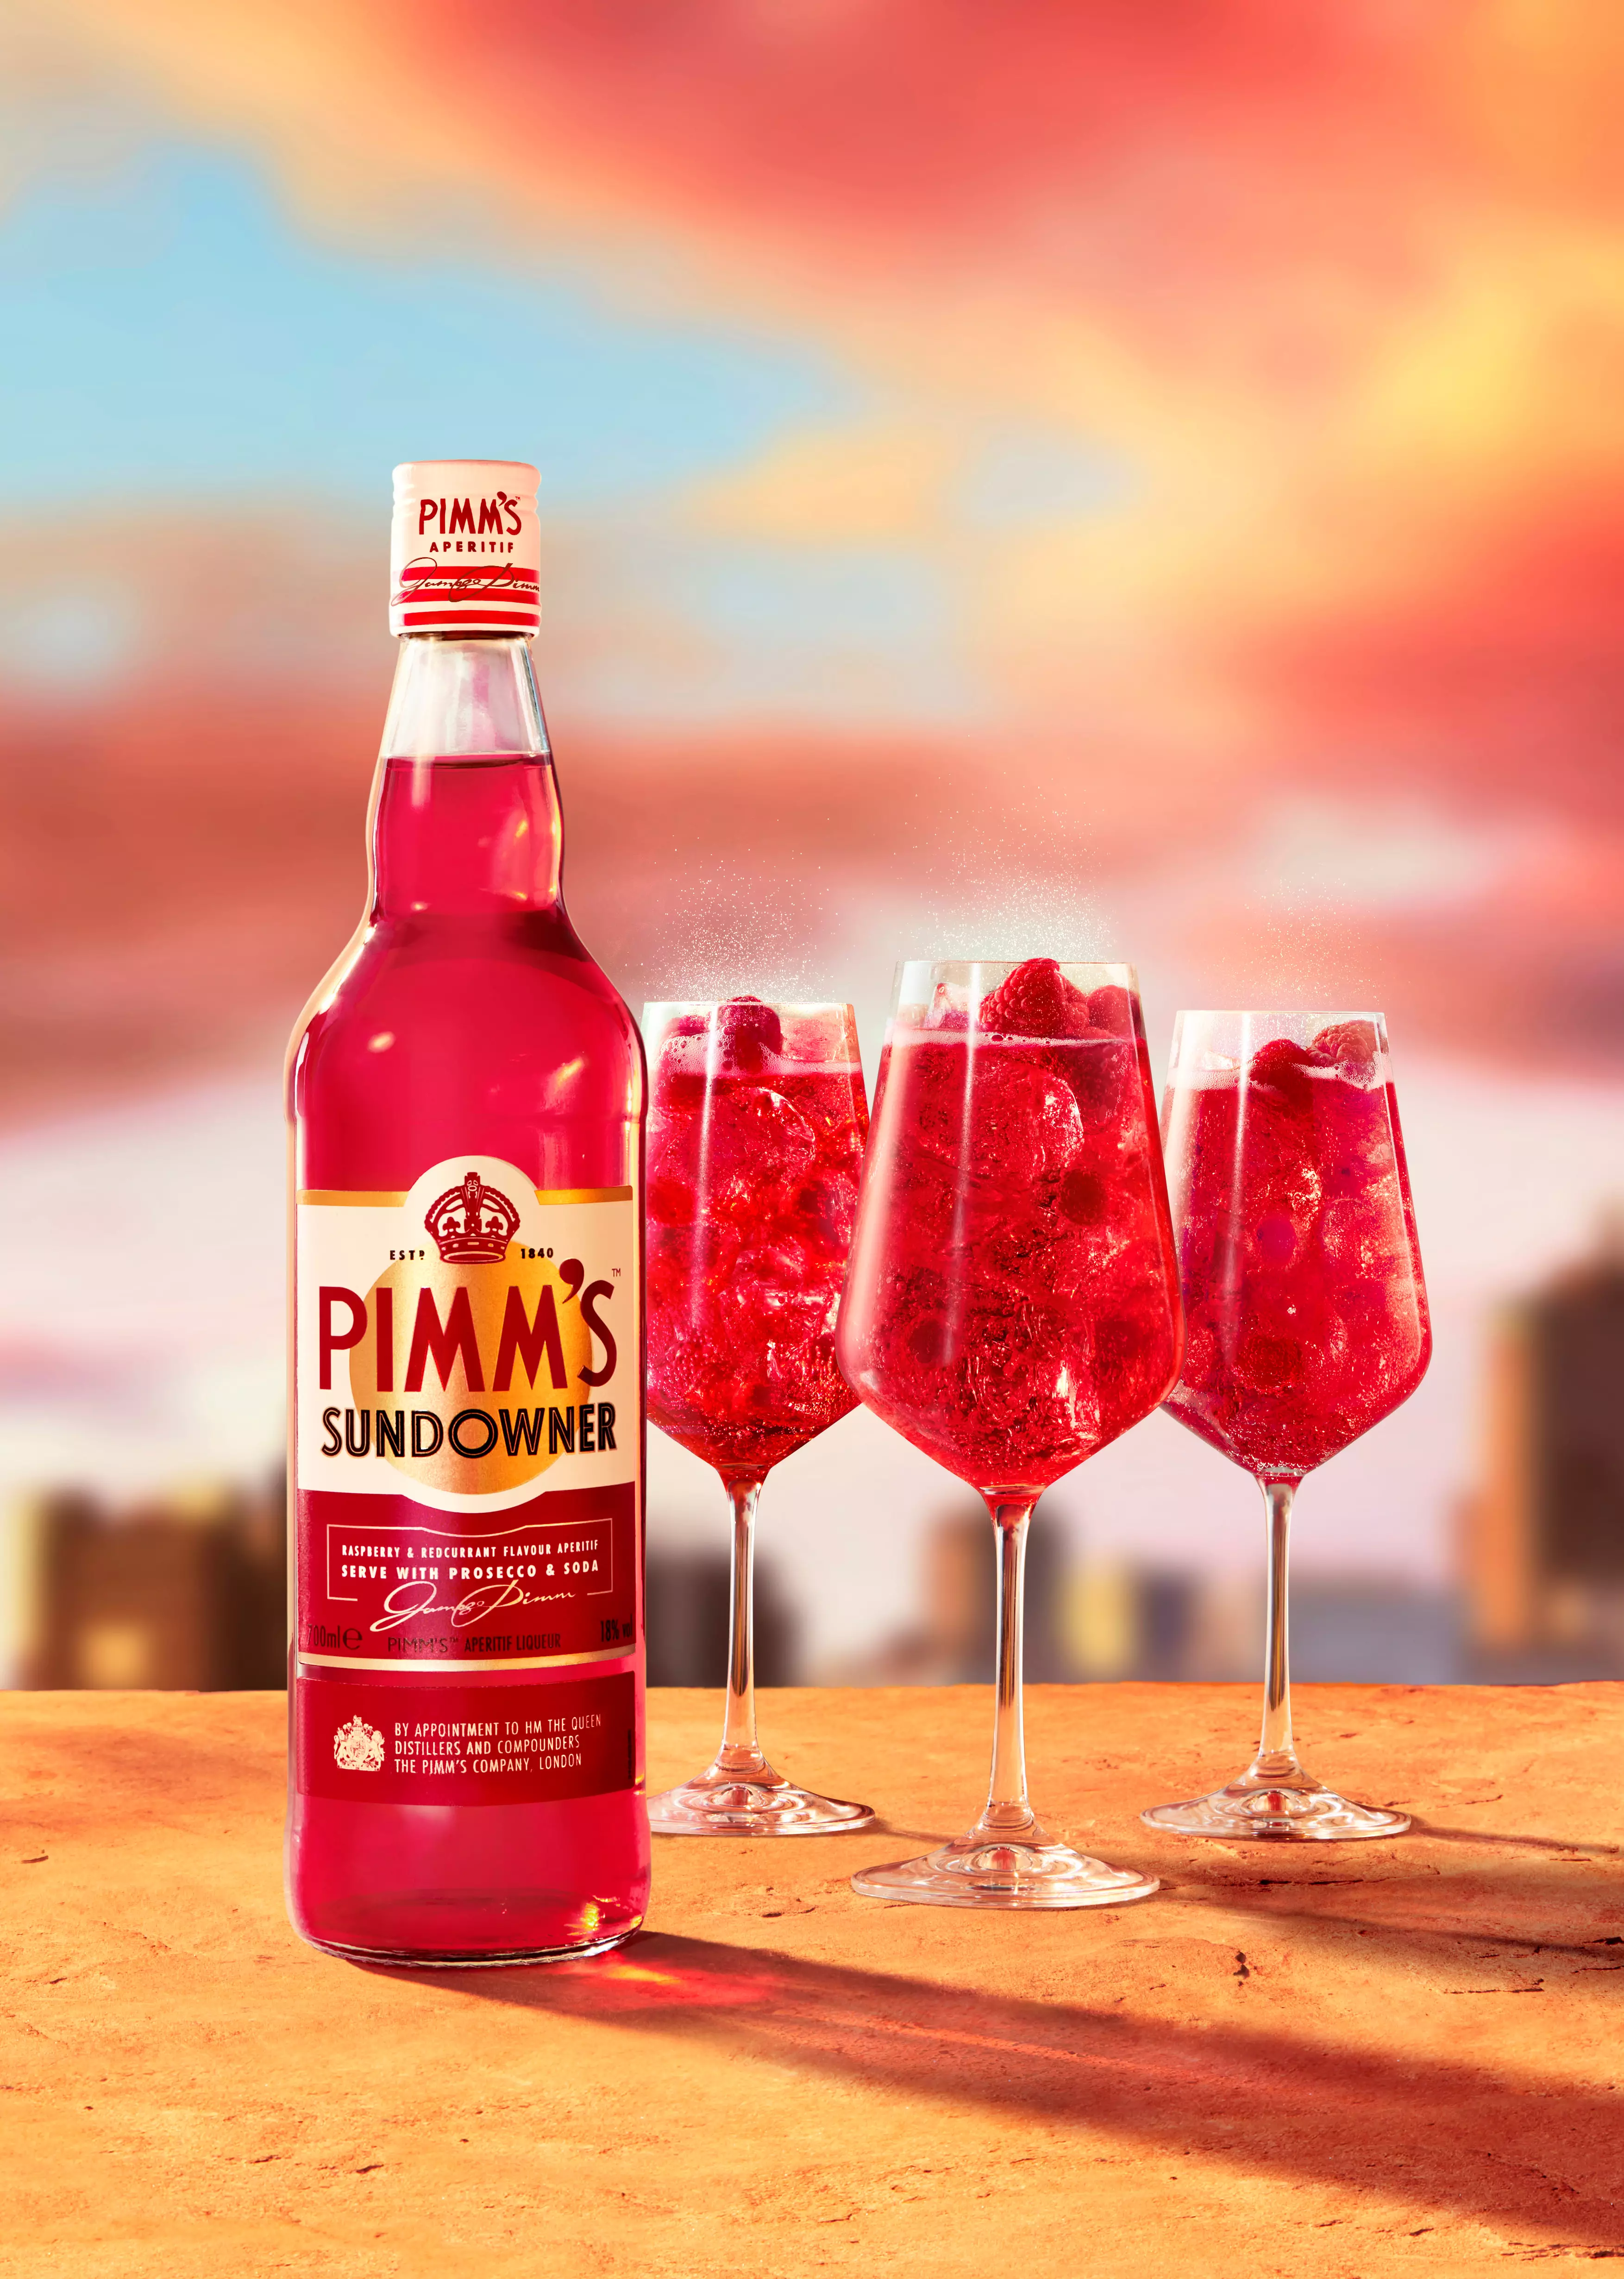 The fruity bev is vibrant red in colour, featuring both raspberry and tart redcurrant flavours (